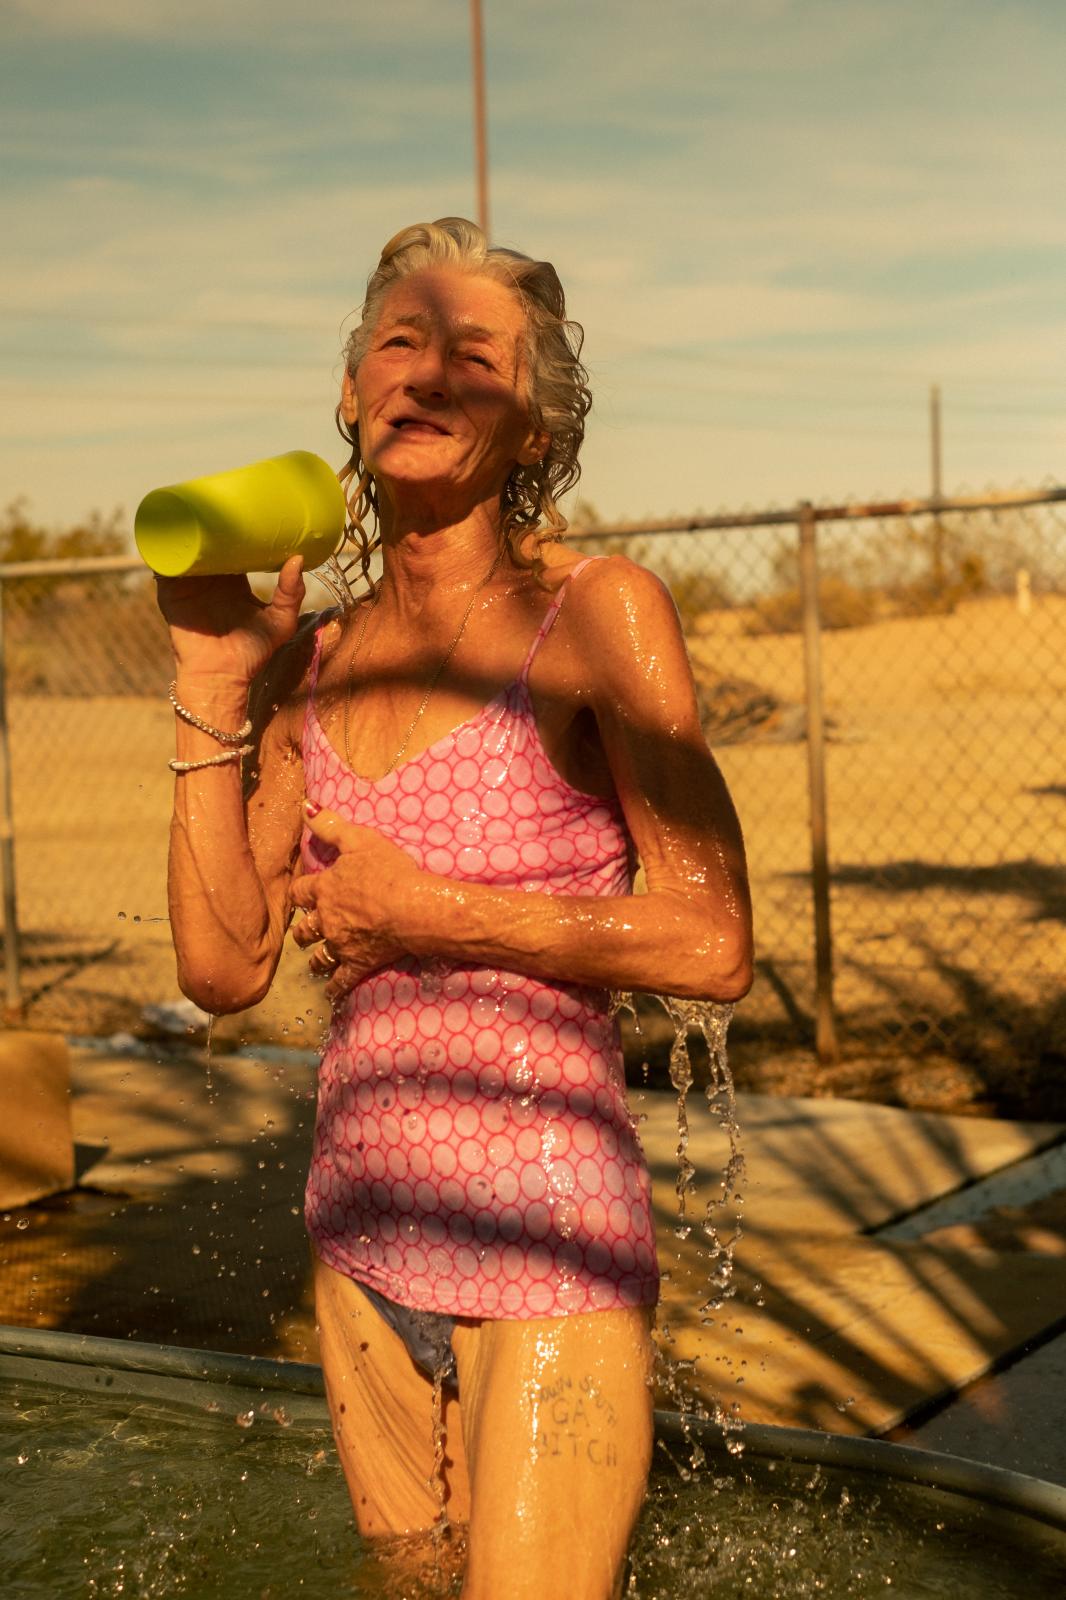 A Warm Winter (An Ongoing Journey) - Darleen at the Hot Springs. Holtville, California.